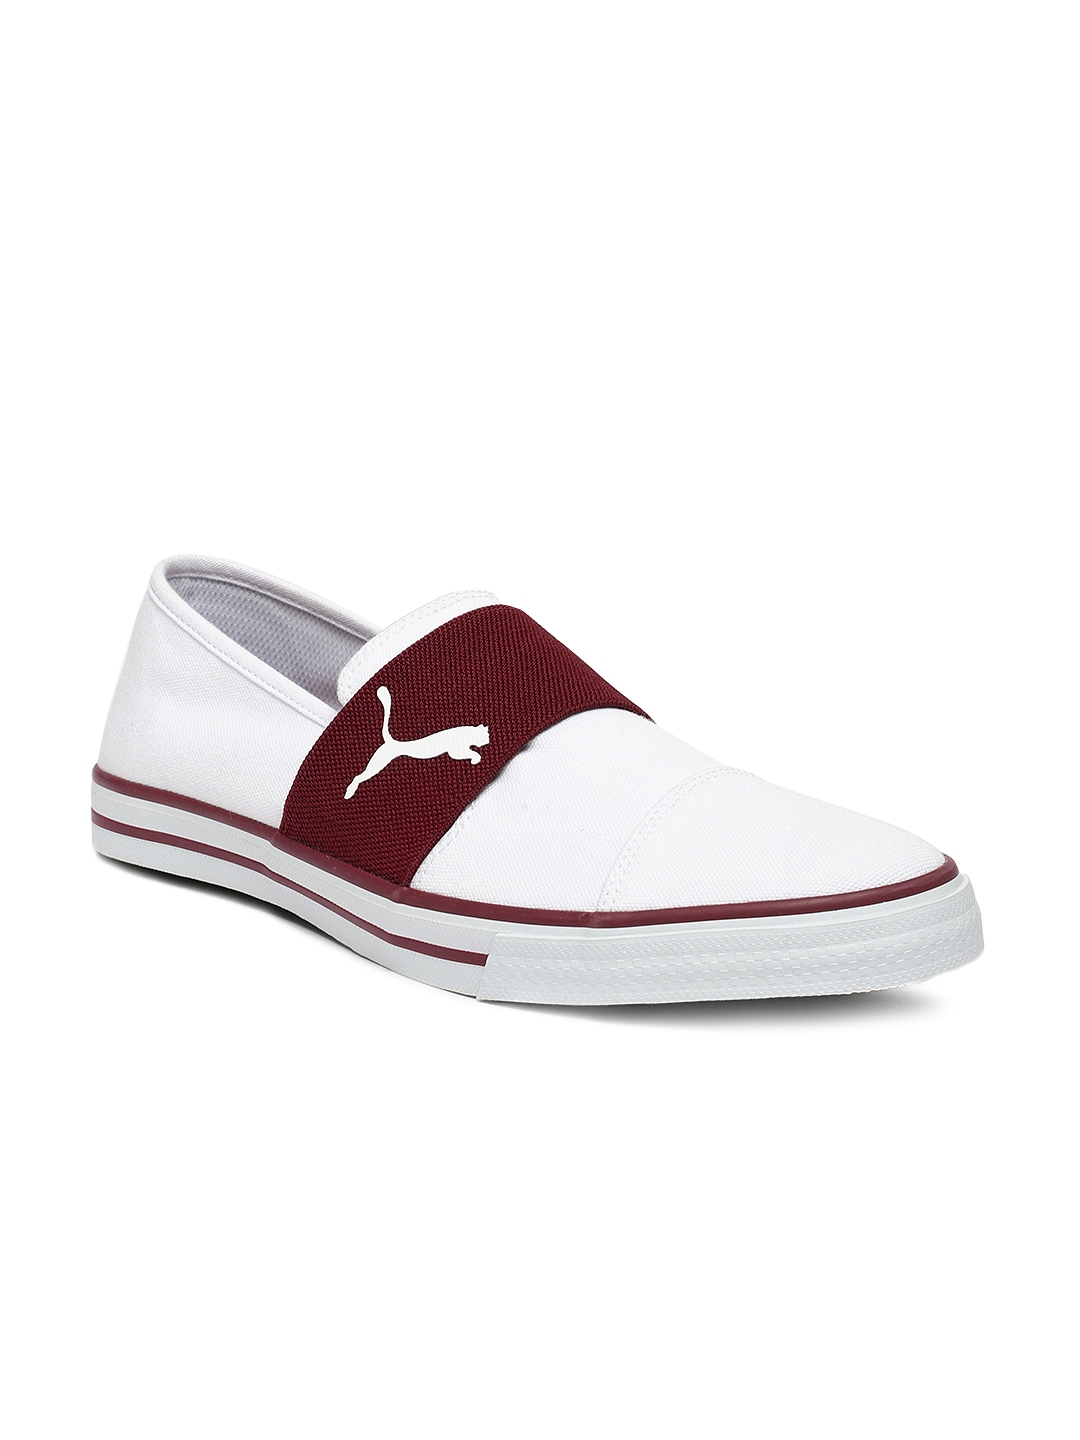 Buy Puma Men White Slip On Sneakers - Casual Shoes for Men 8159799 | Myntra